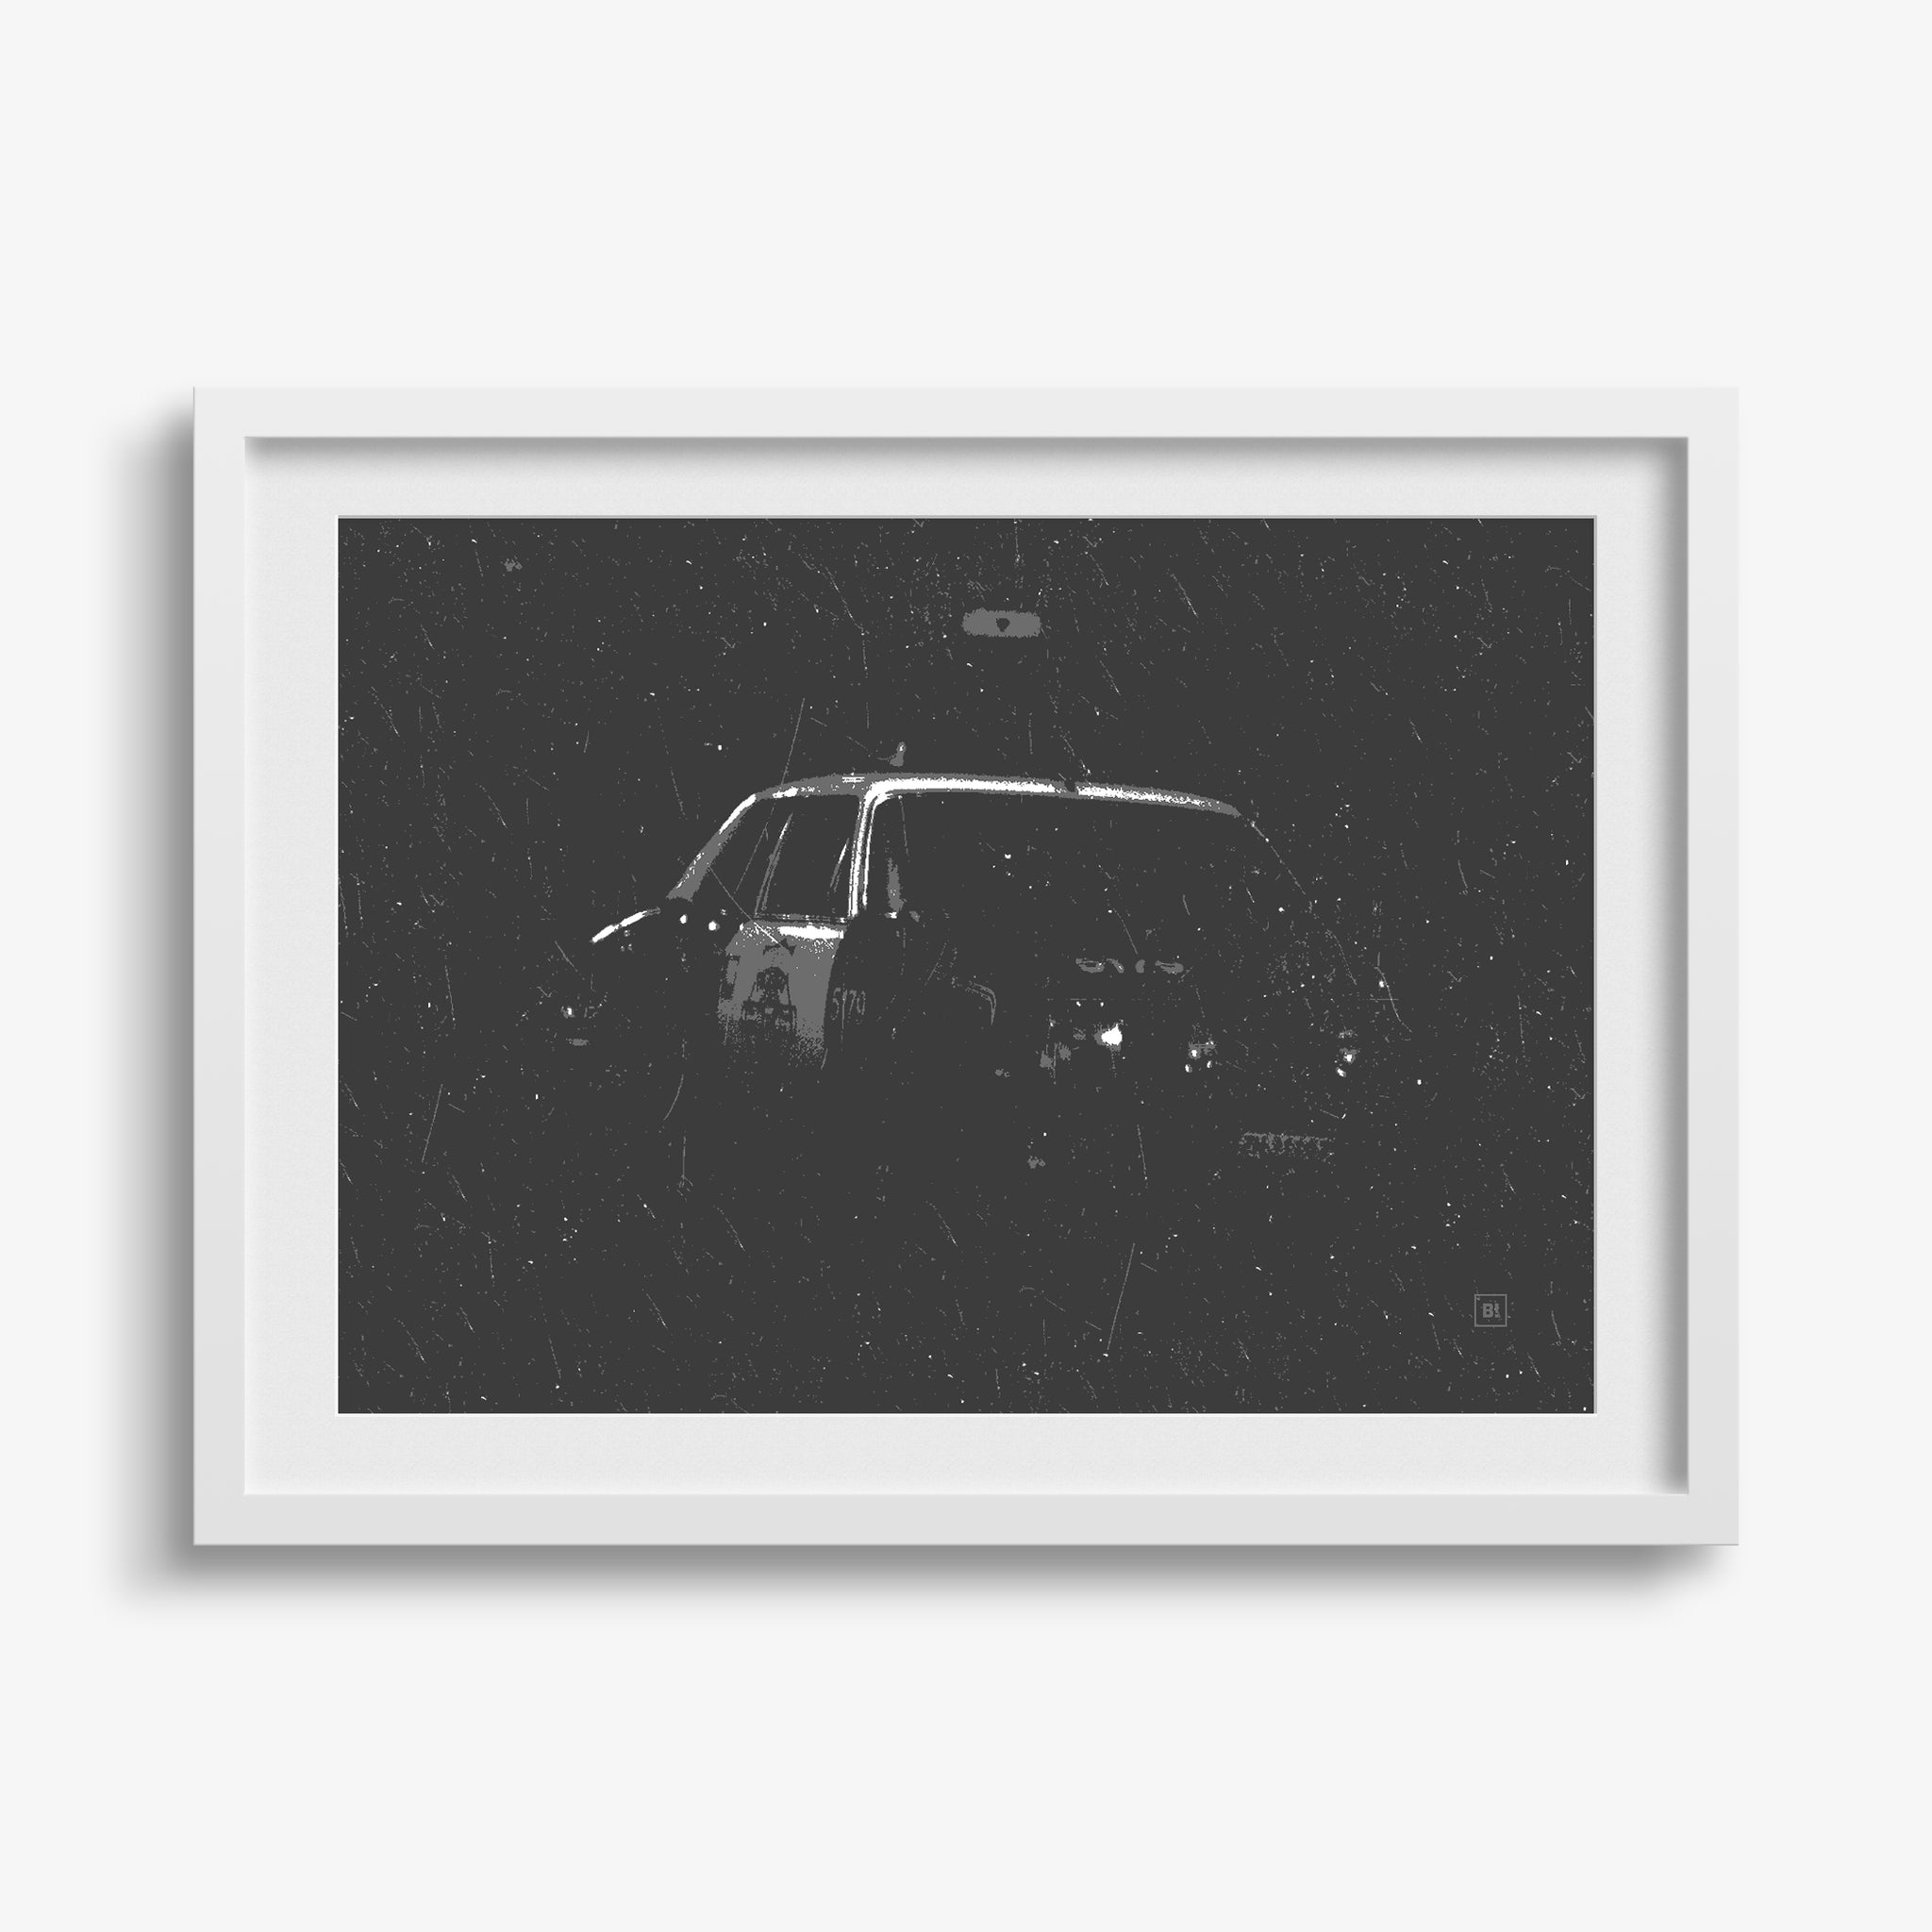 Be inspired by our black and white "5179" art print! This artwork was printed using the giclée process on archival acid-free paper and is presented in a white frame with passe-partout, capturing its timeless beauty in every detail.